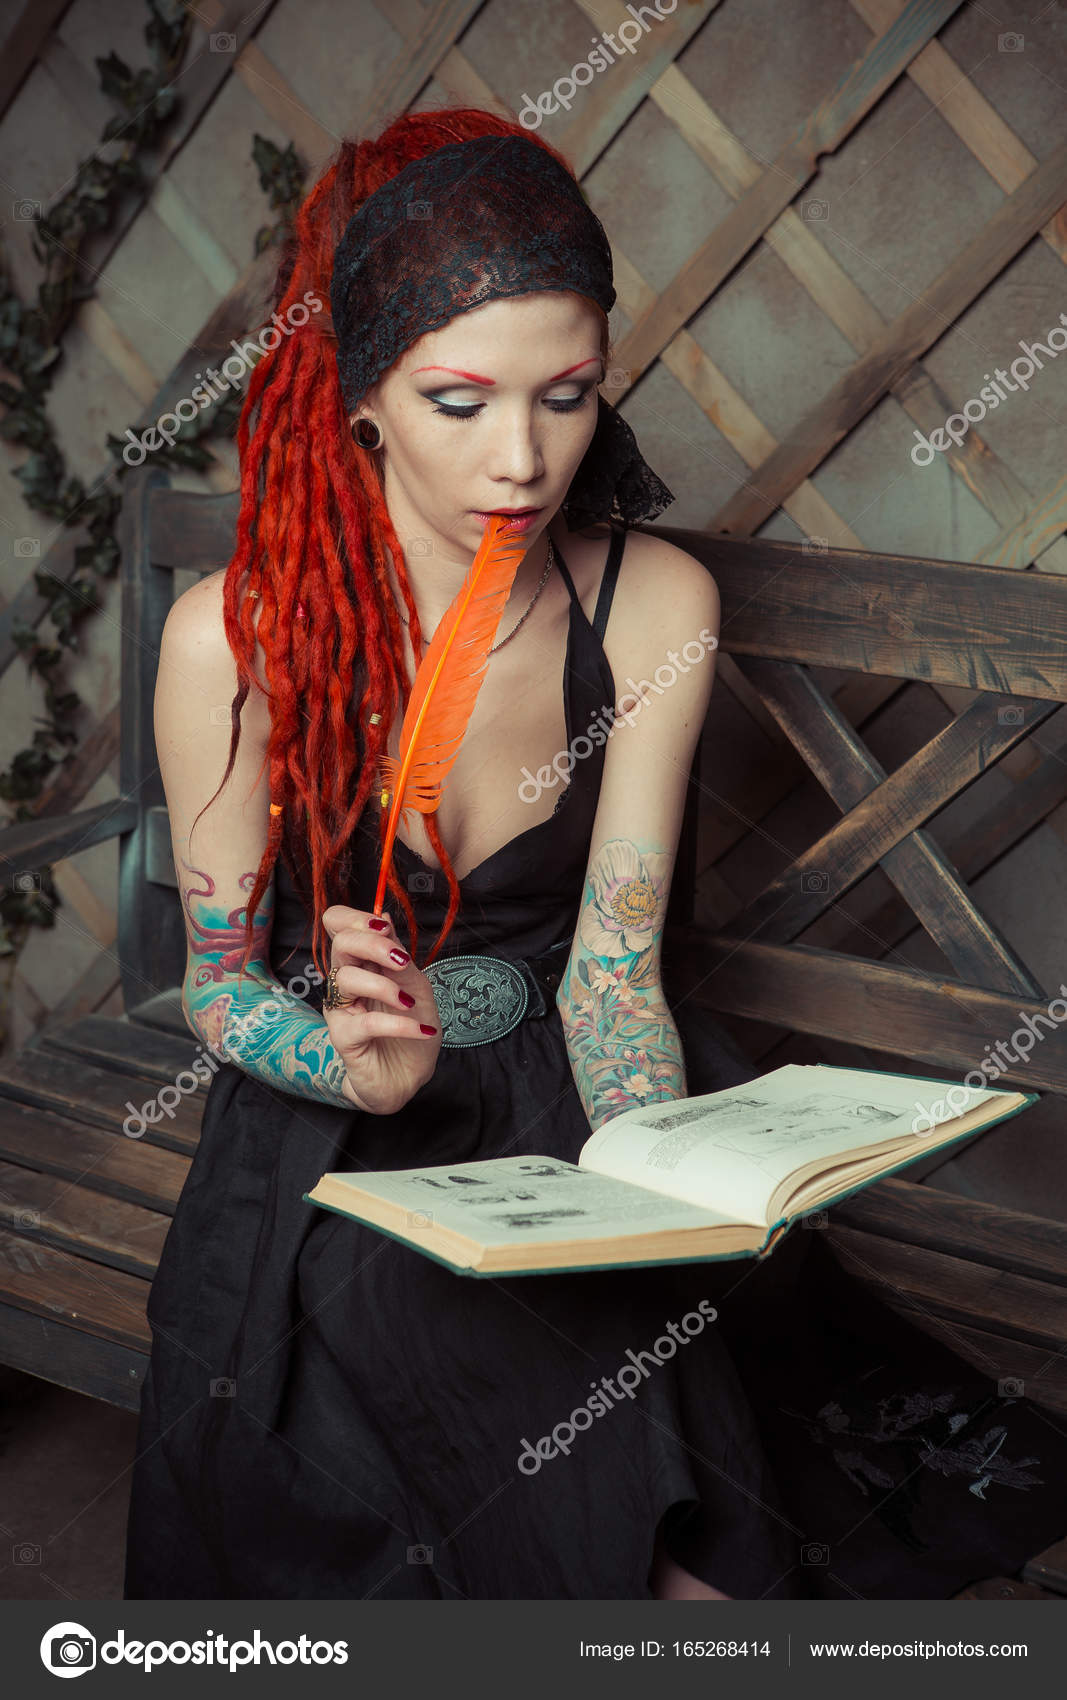 Tattooed Girl With Red Dreadlocks Sitting On A Bench